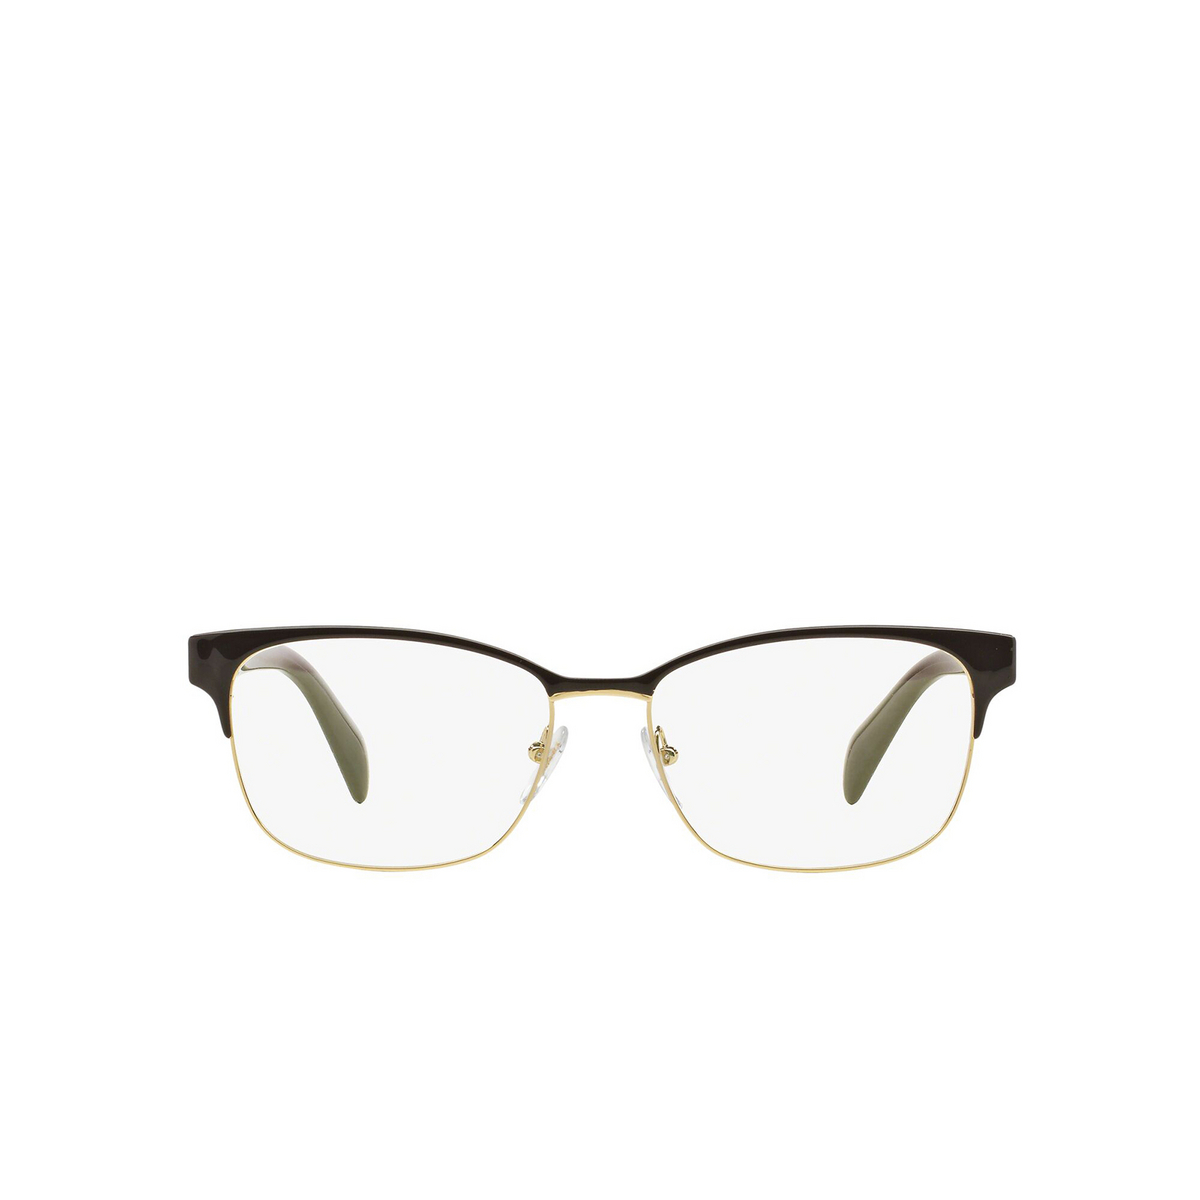 Prada CONCEPTUAL Eyeglasses DHO1O1 Brown on Pale Gold - front view